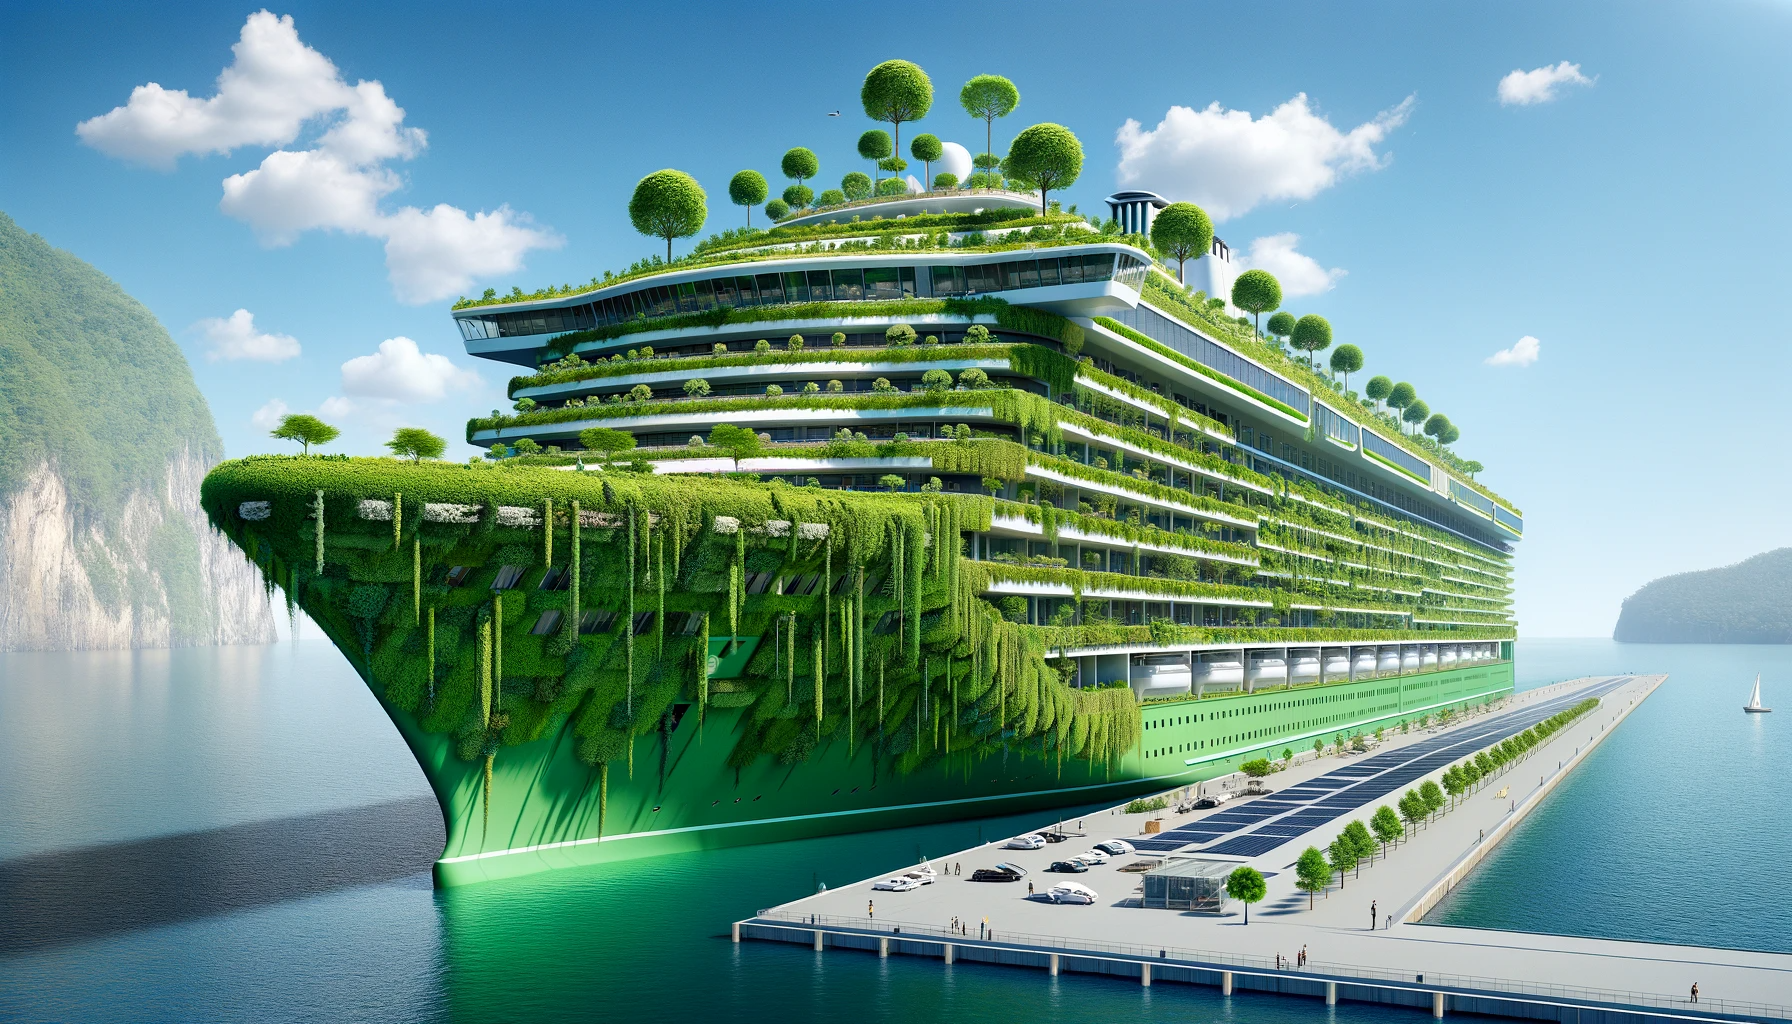 Sustainable Cruising - Imagine A Large, State-Of-The-Art Cruise Ship Covered With Lush, Green Vertical Gardens. These Gardens Are Integrated Into The Ship'S Design.